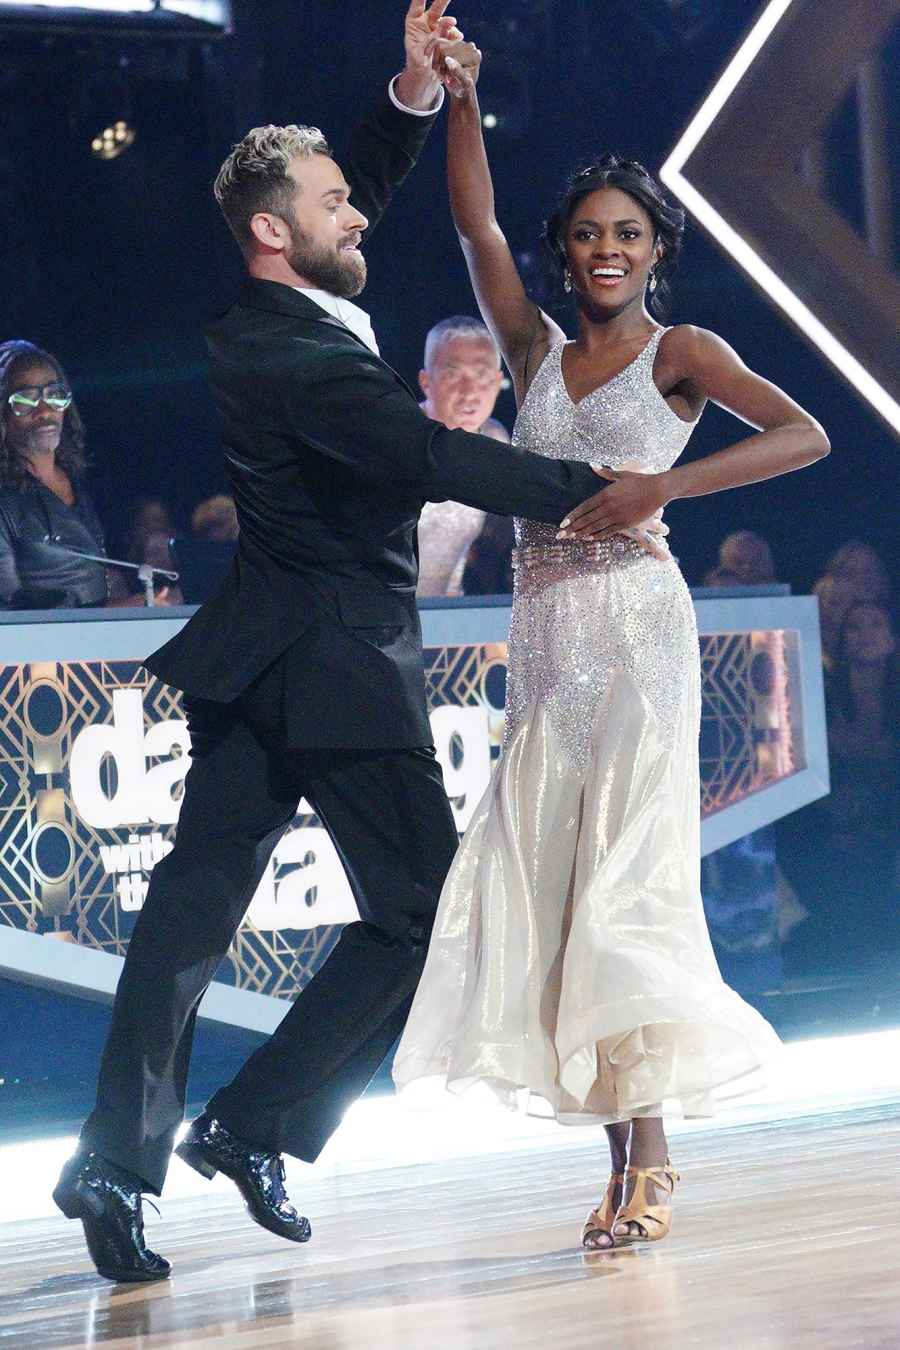 Charity Lawson and Artem Chigvintsev Dancing With the Stars Pays Tribute to Whitney Houston See Who Was Eliminated